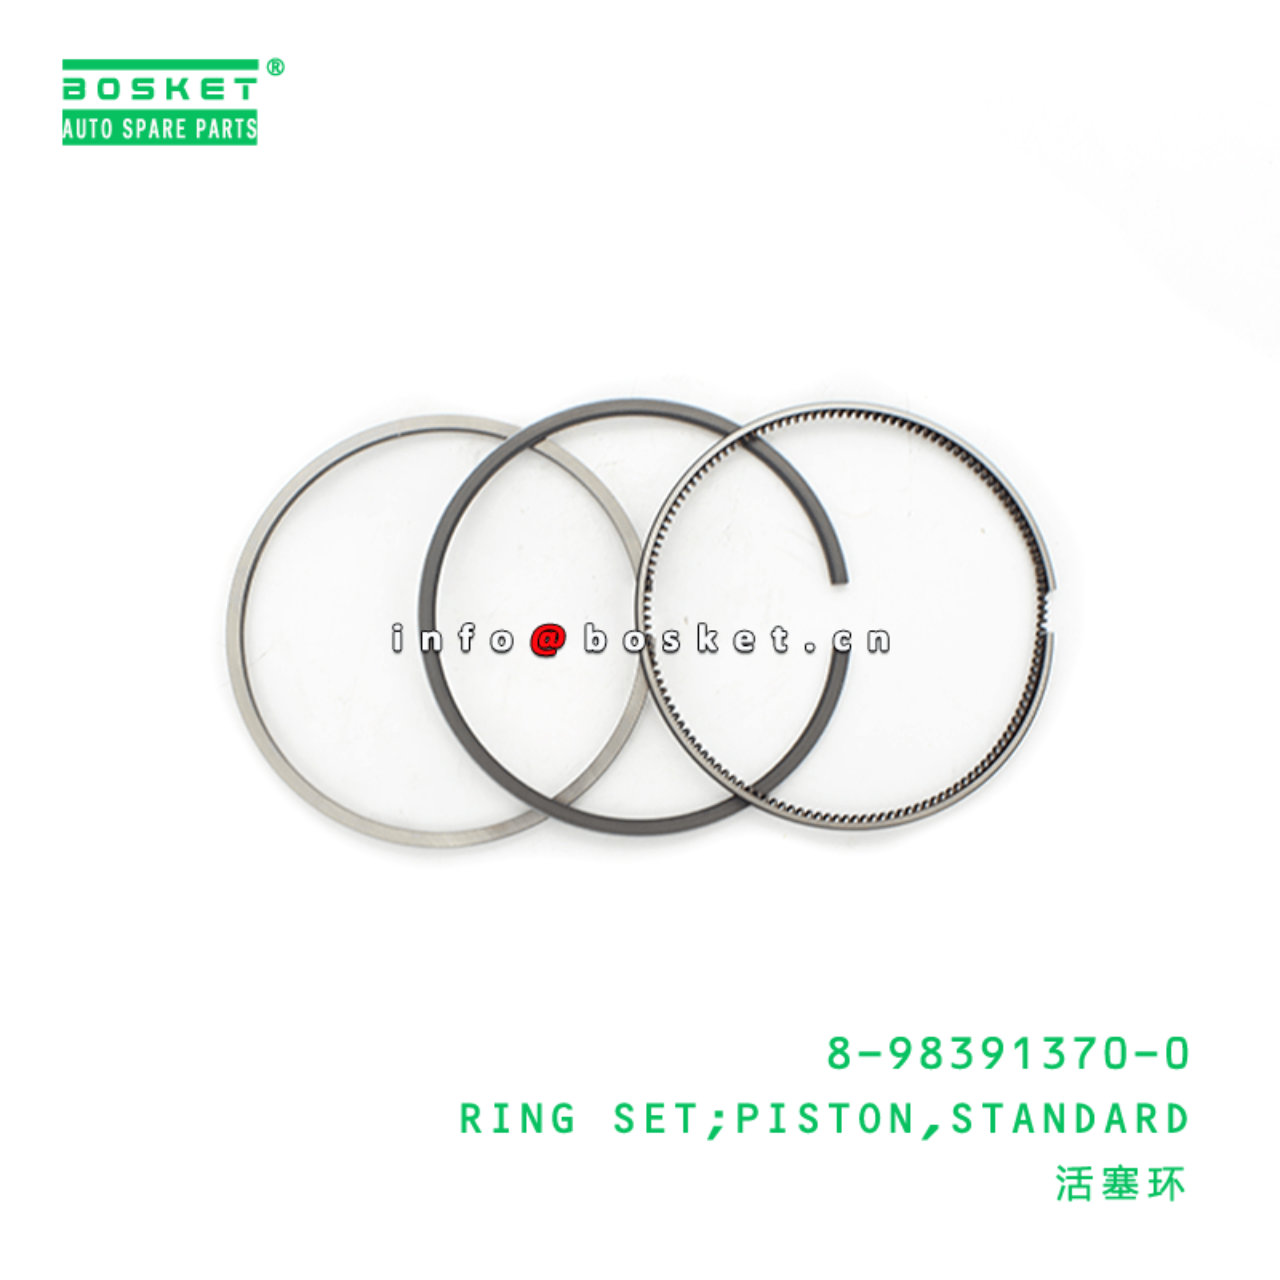 8-98391370-0 Standard Piston Ring Set 8983913700 Suitable for 